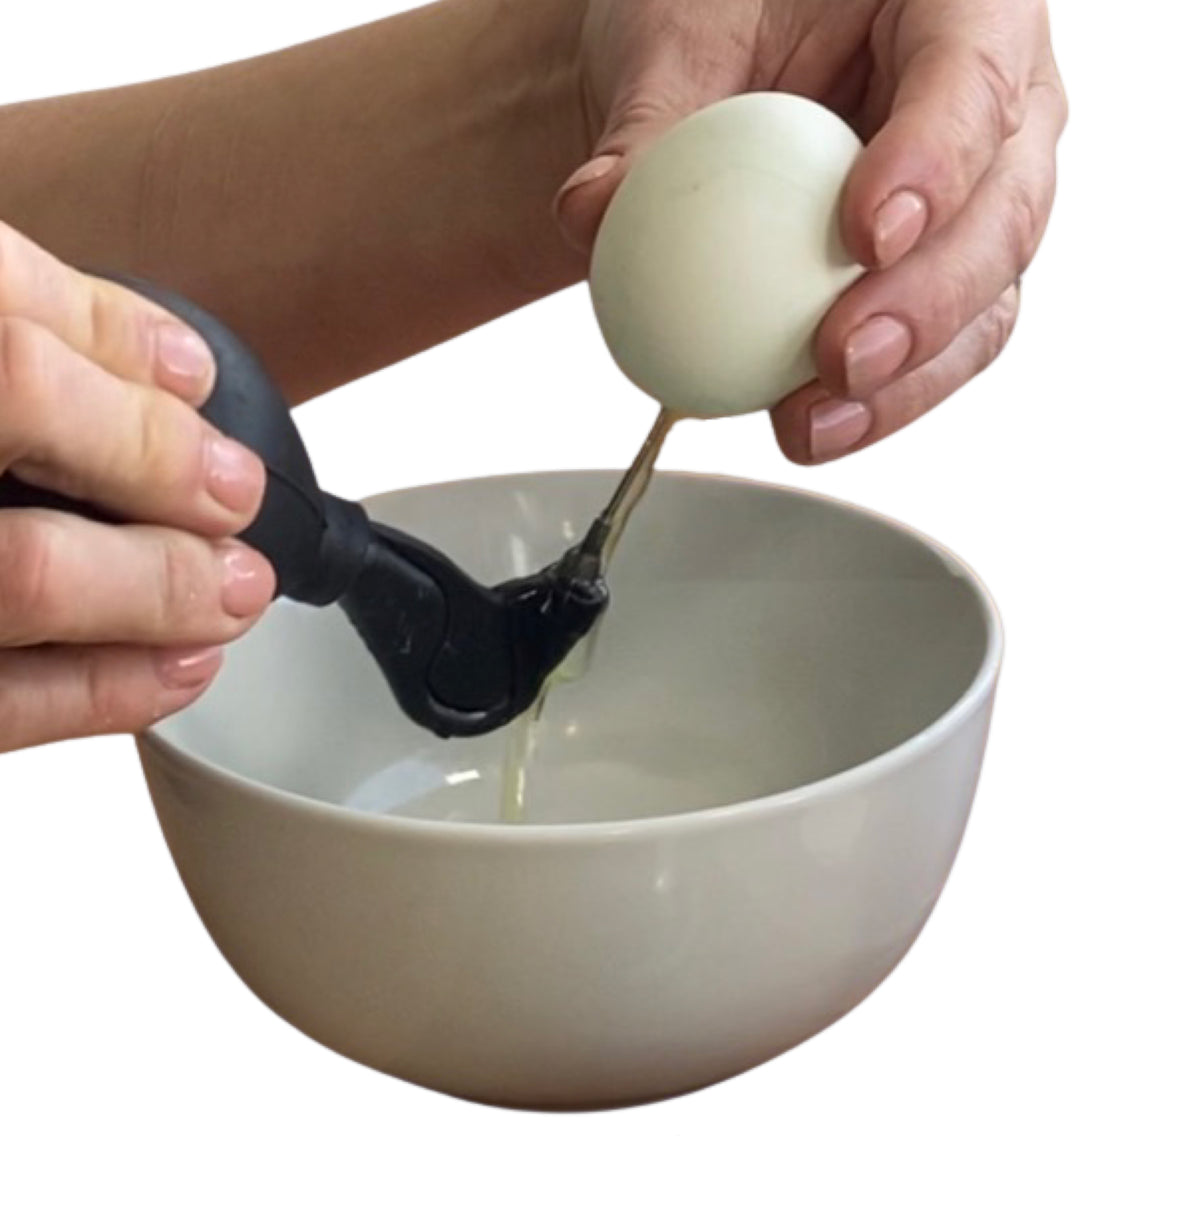 Egg Blowing System for Easter Crafts